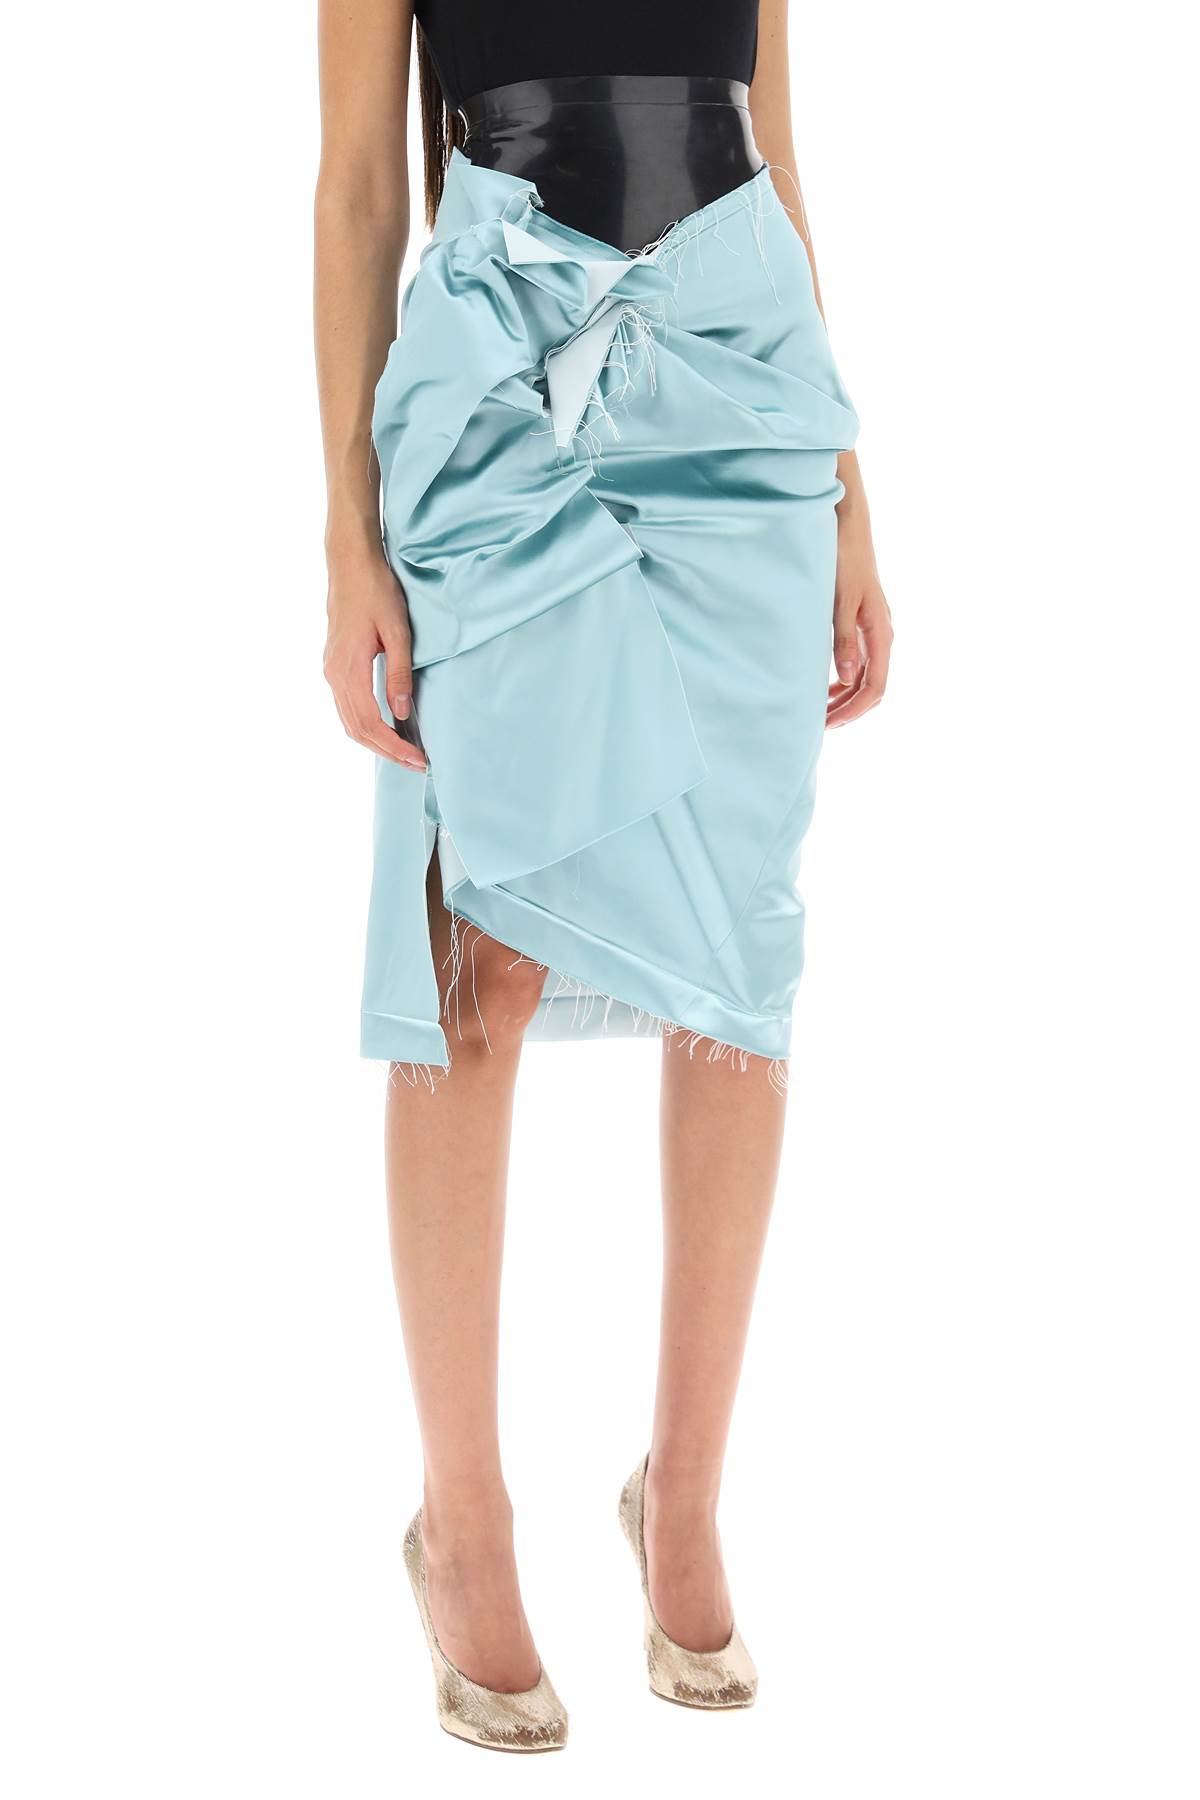 MAISON MARGIELA DECORTIQUE SKIRT WITH BUILT-IN BRIEFS IN LATEX